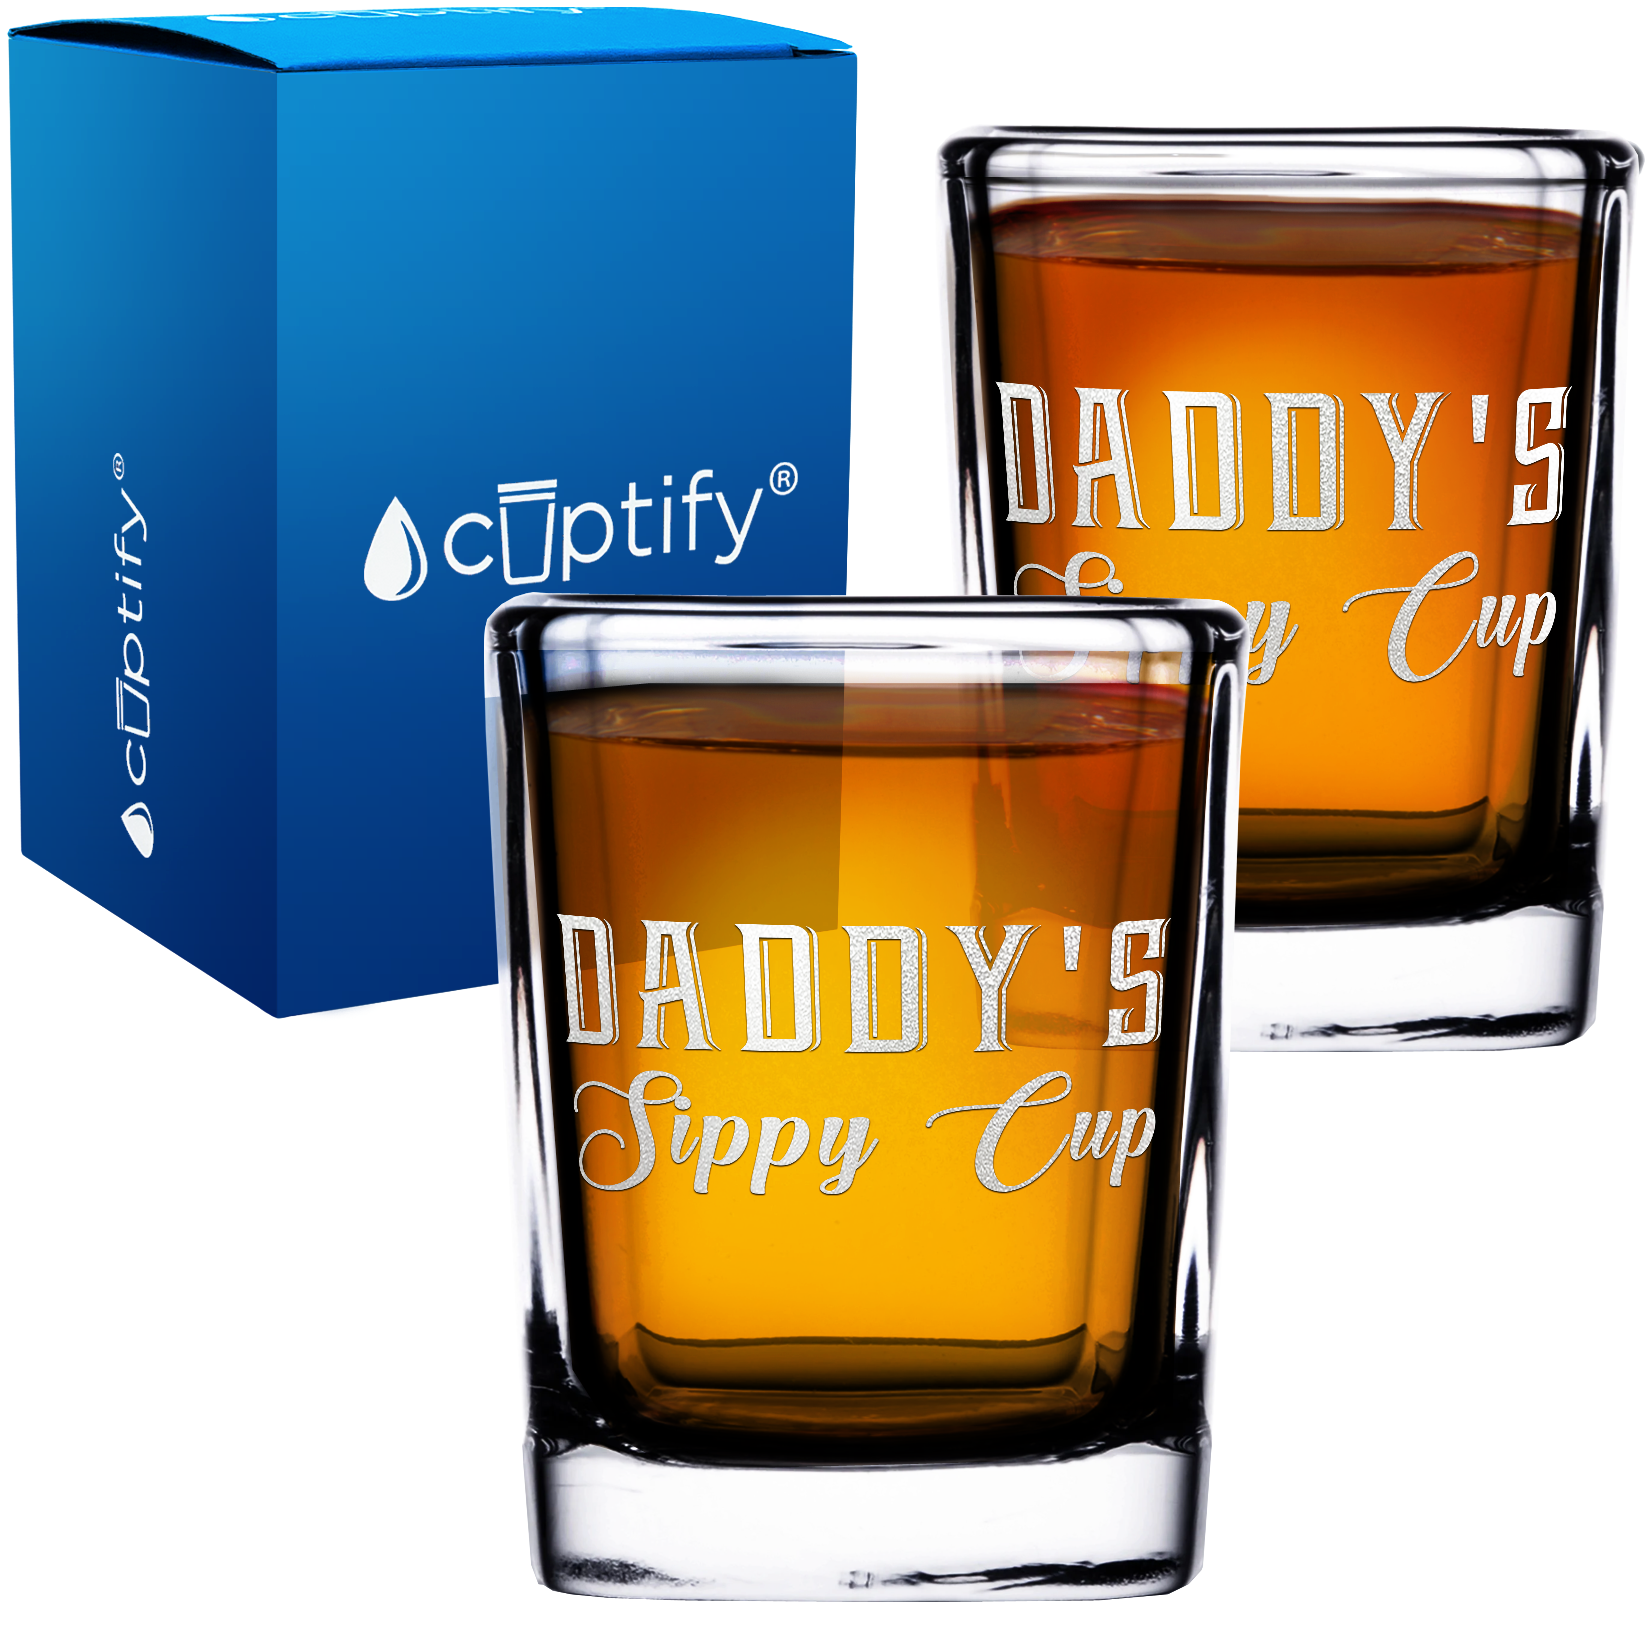 Daddy's Sippy Cup 2oz Square Shot Glasses - Set of 2